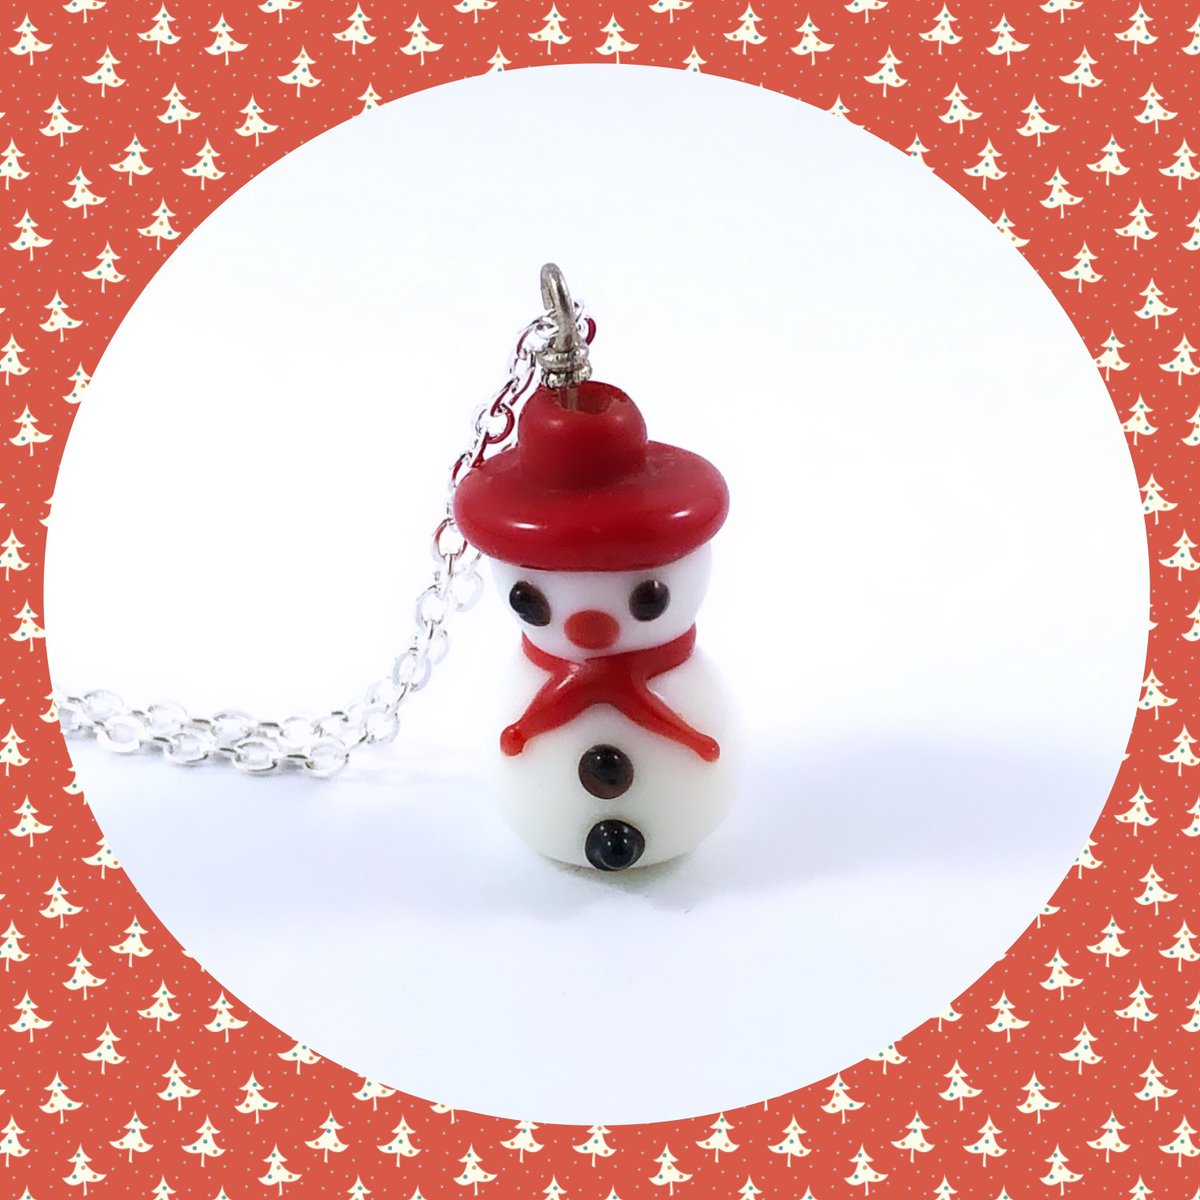 Christmas in July is here!
Cute frosty the snowman Christmas winter snow lamp work pendant silver plated necklace etsy.me/3D4j5Kt #silver #white #people #red #eastergift #pendantnecklace #christmasjewelry #christmasjewellery #christm